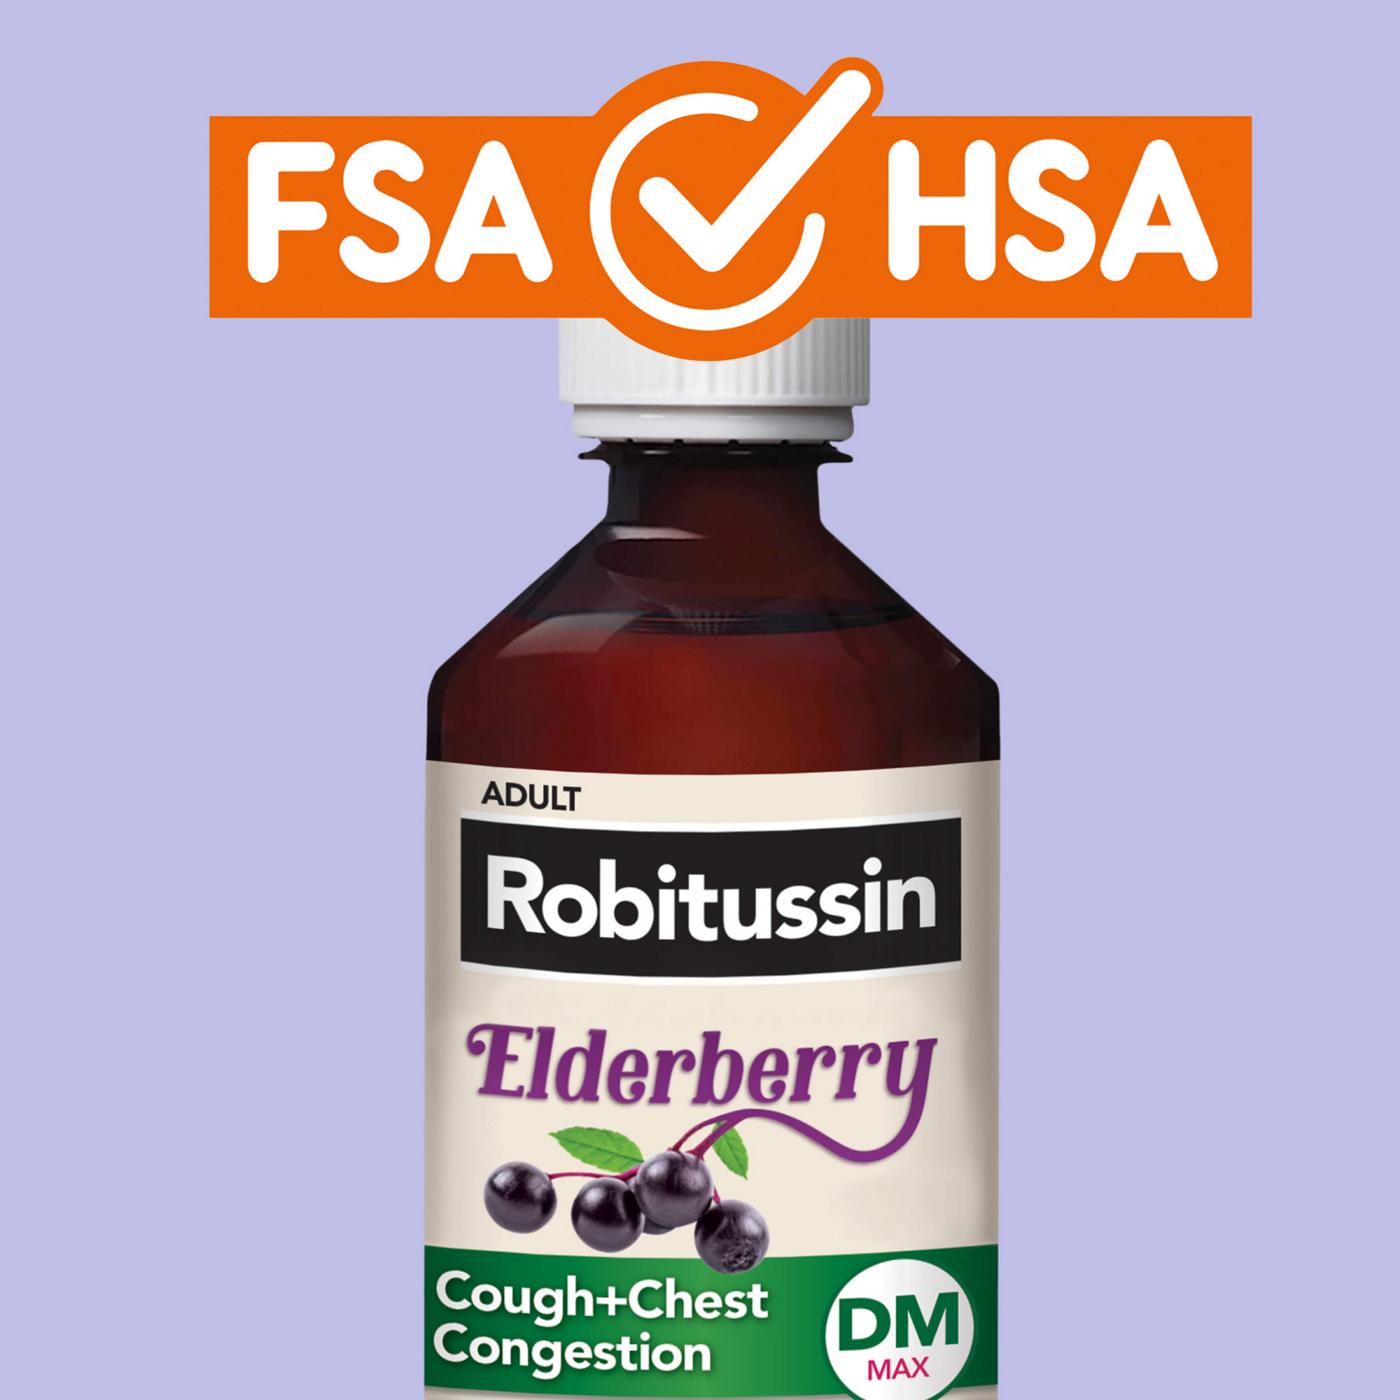 Robitussin Elderberry Cough + Chest Congestion DM Syrup; image 4 of 8